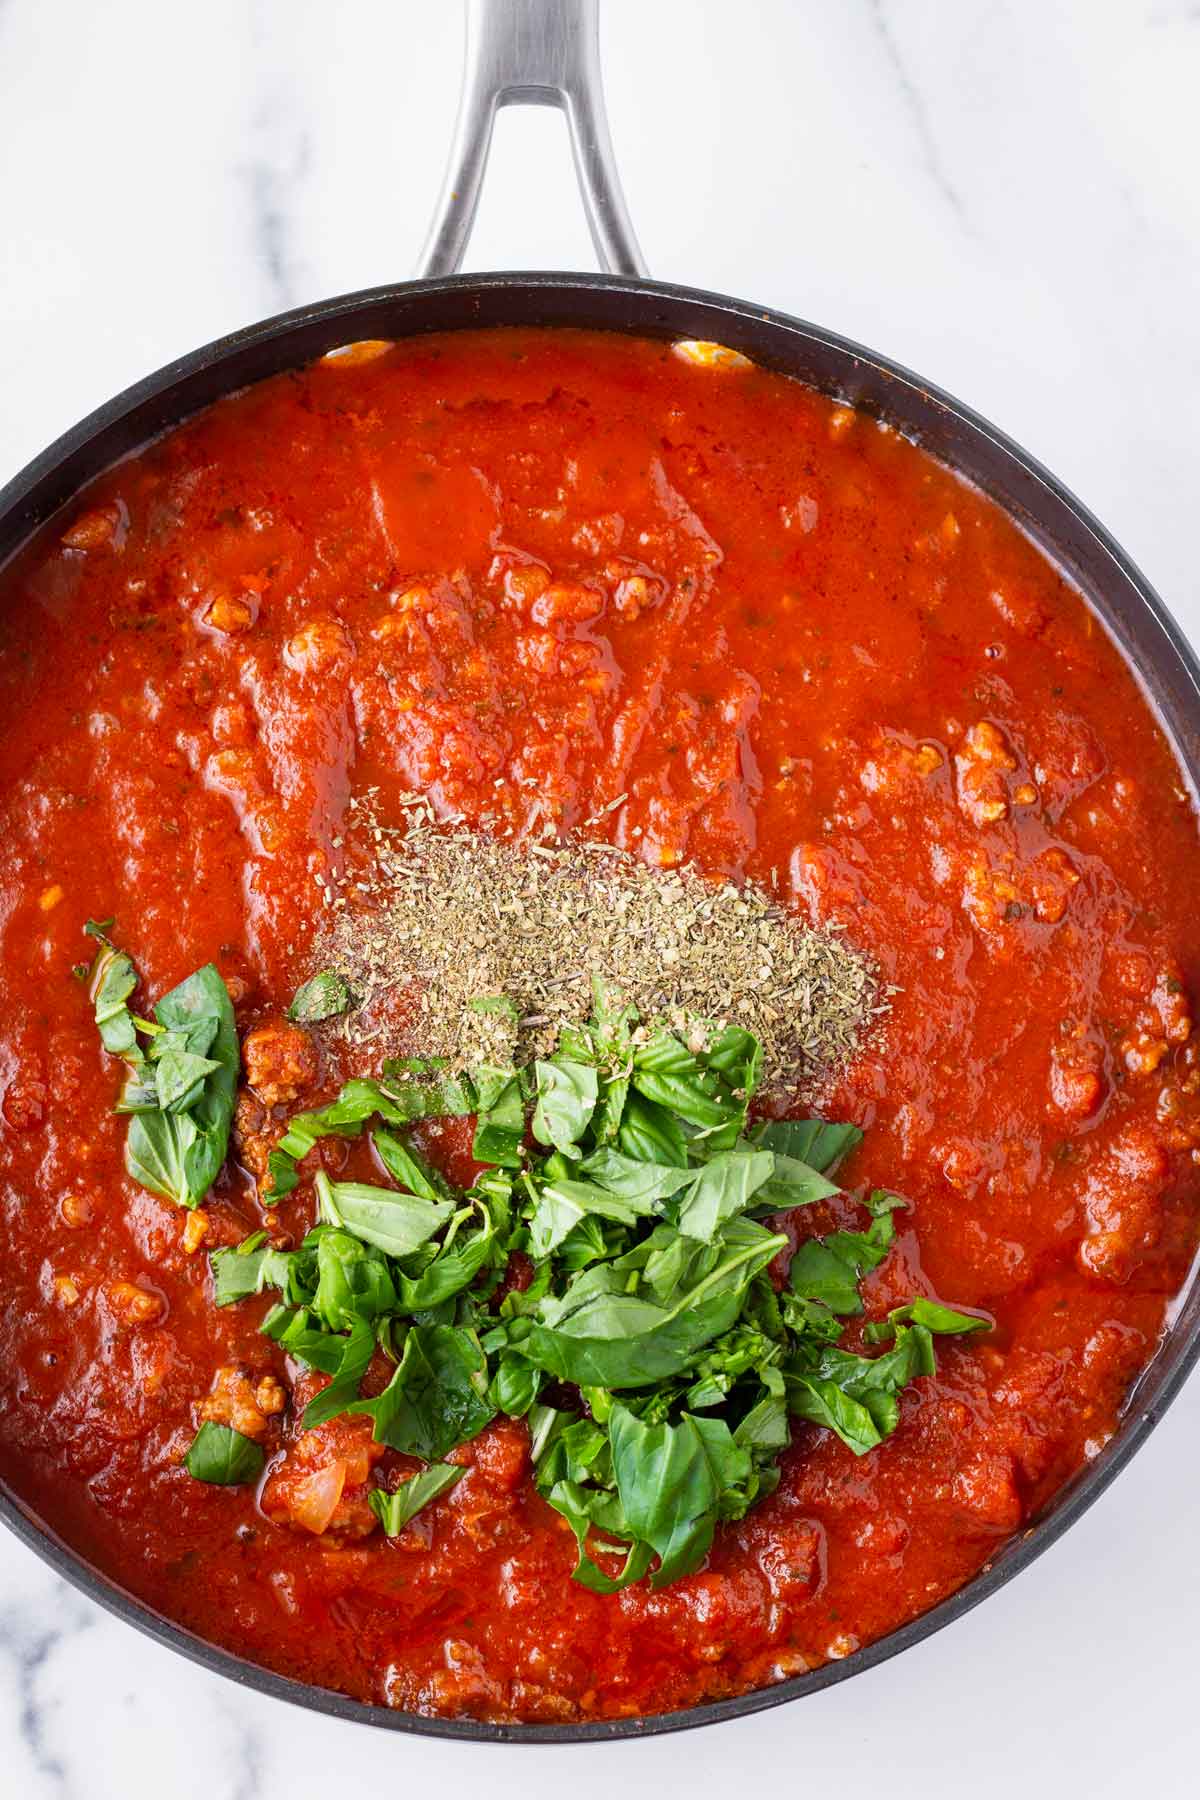 base tomato meat sauce with herb seasoning and fresh basil